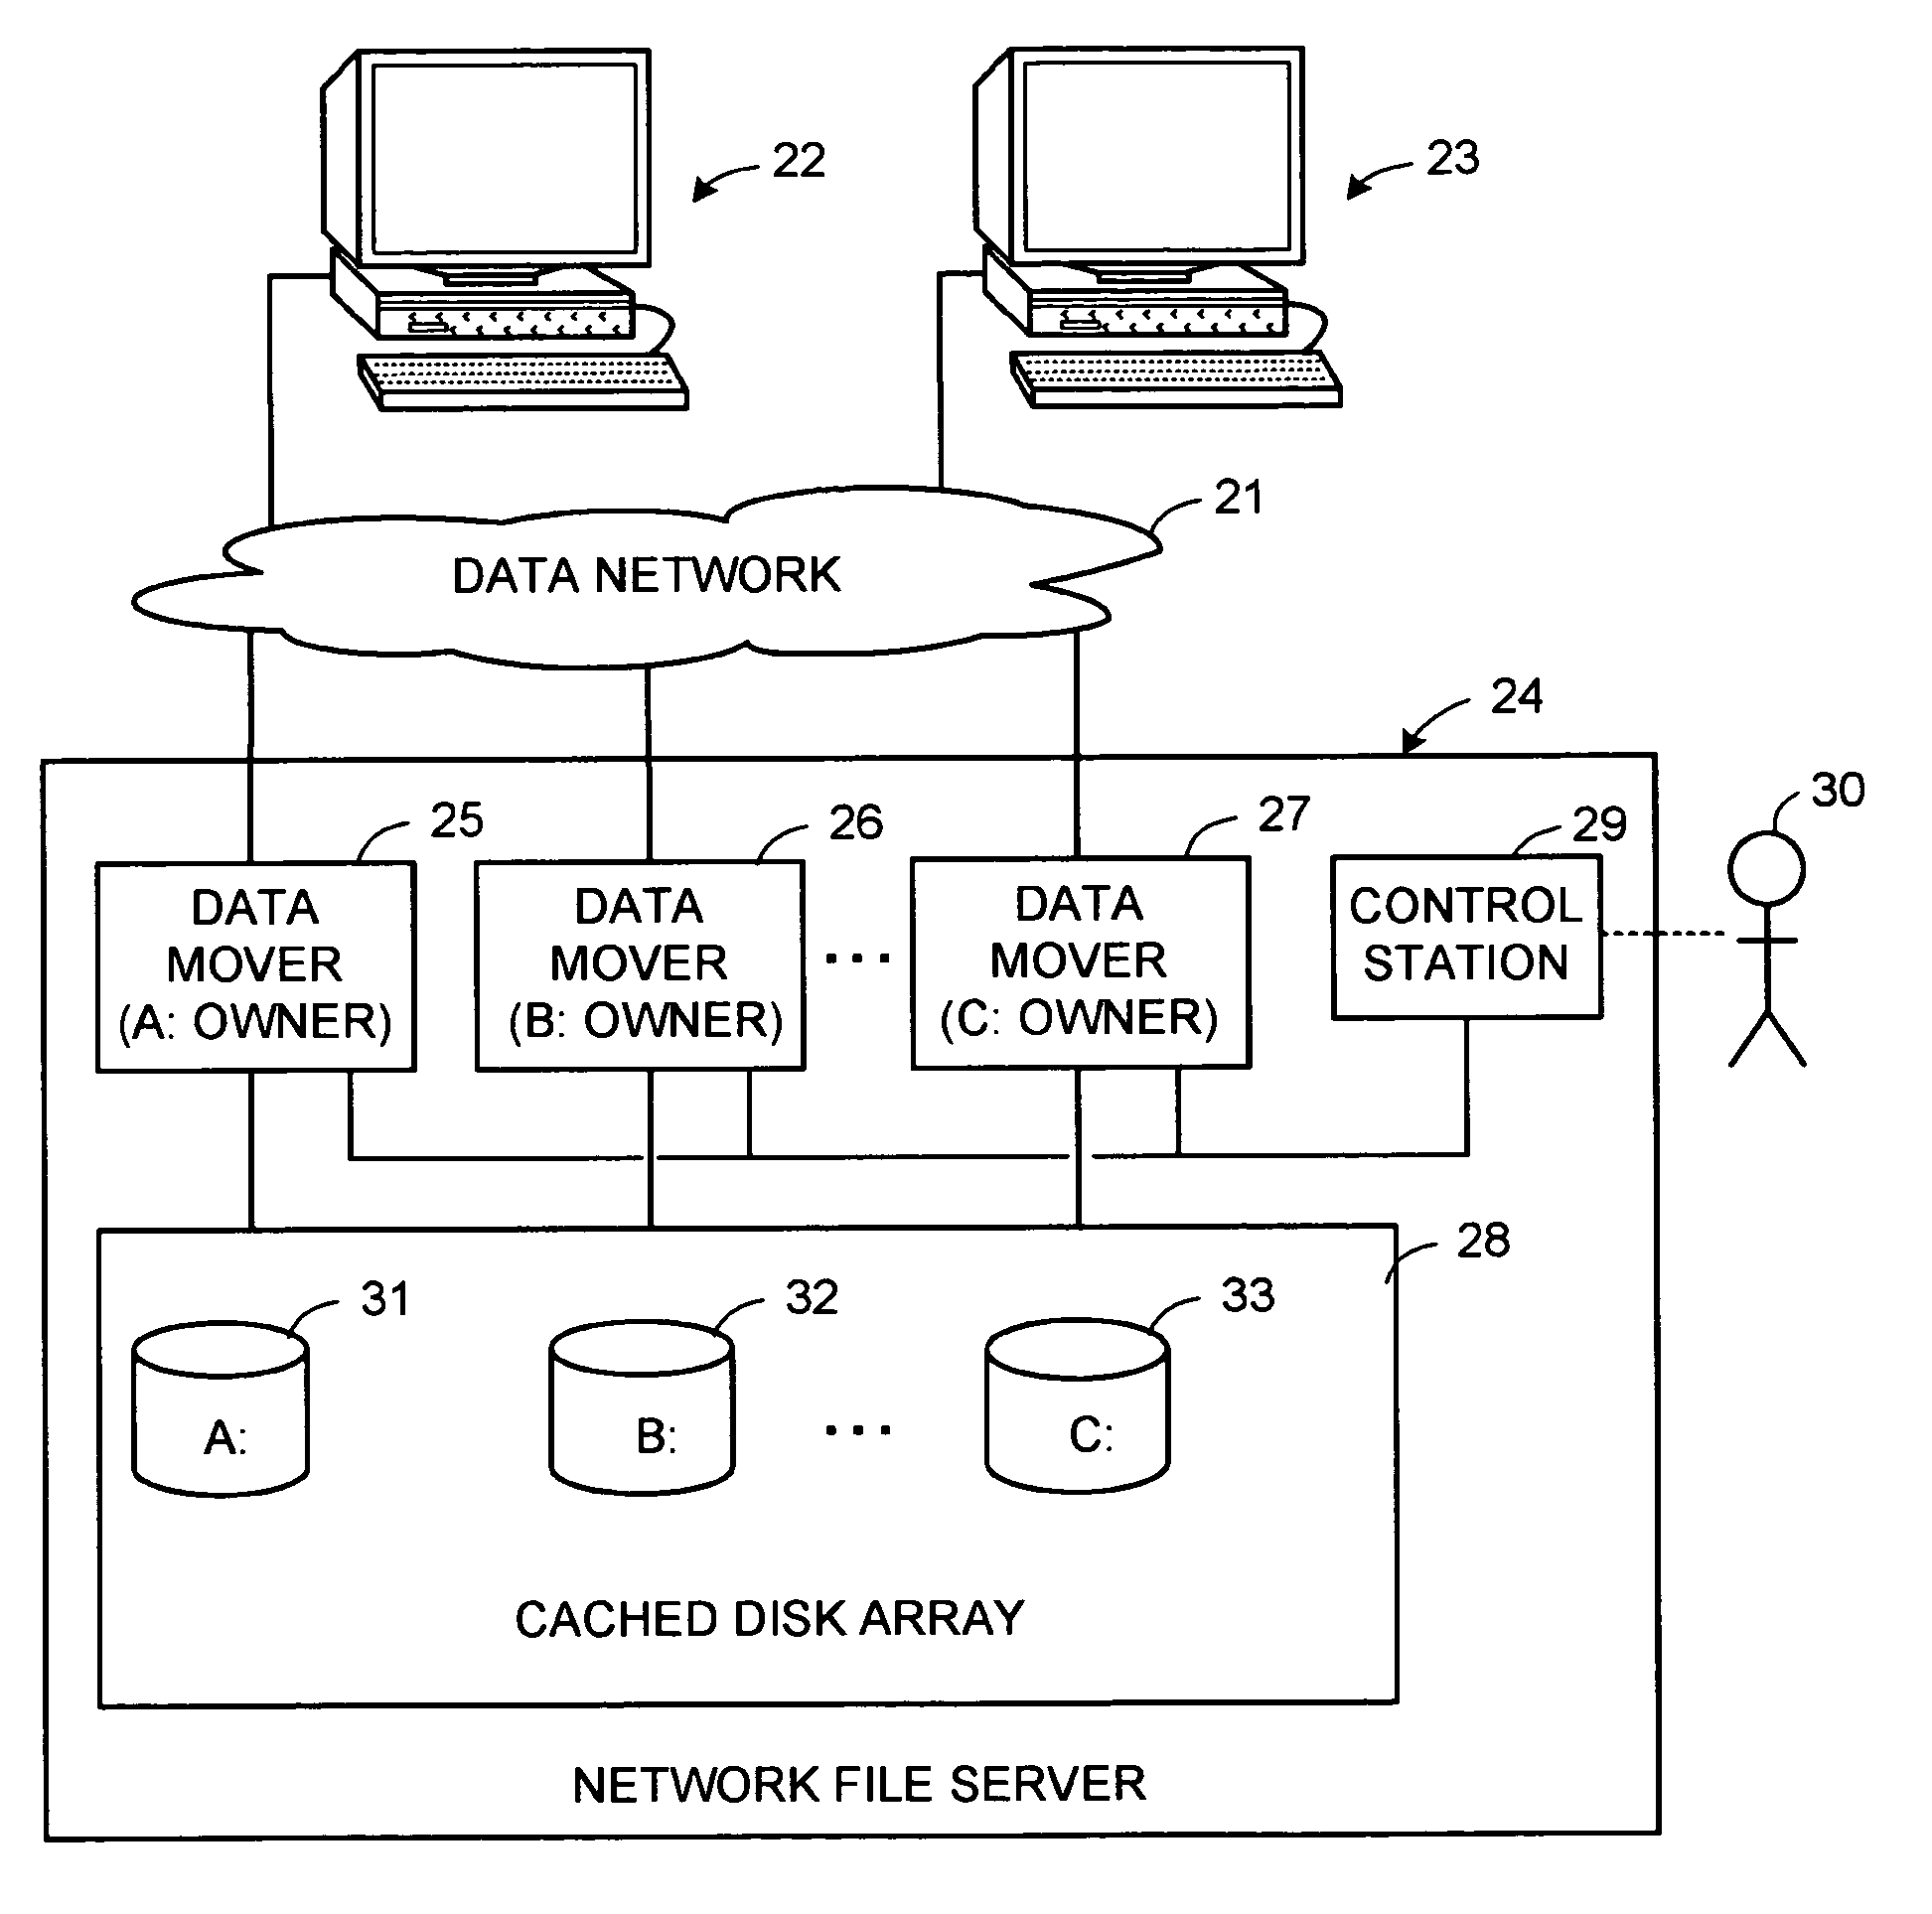 Lock management for concurrent access to a single file from multiple data mover computers